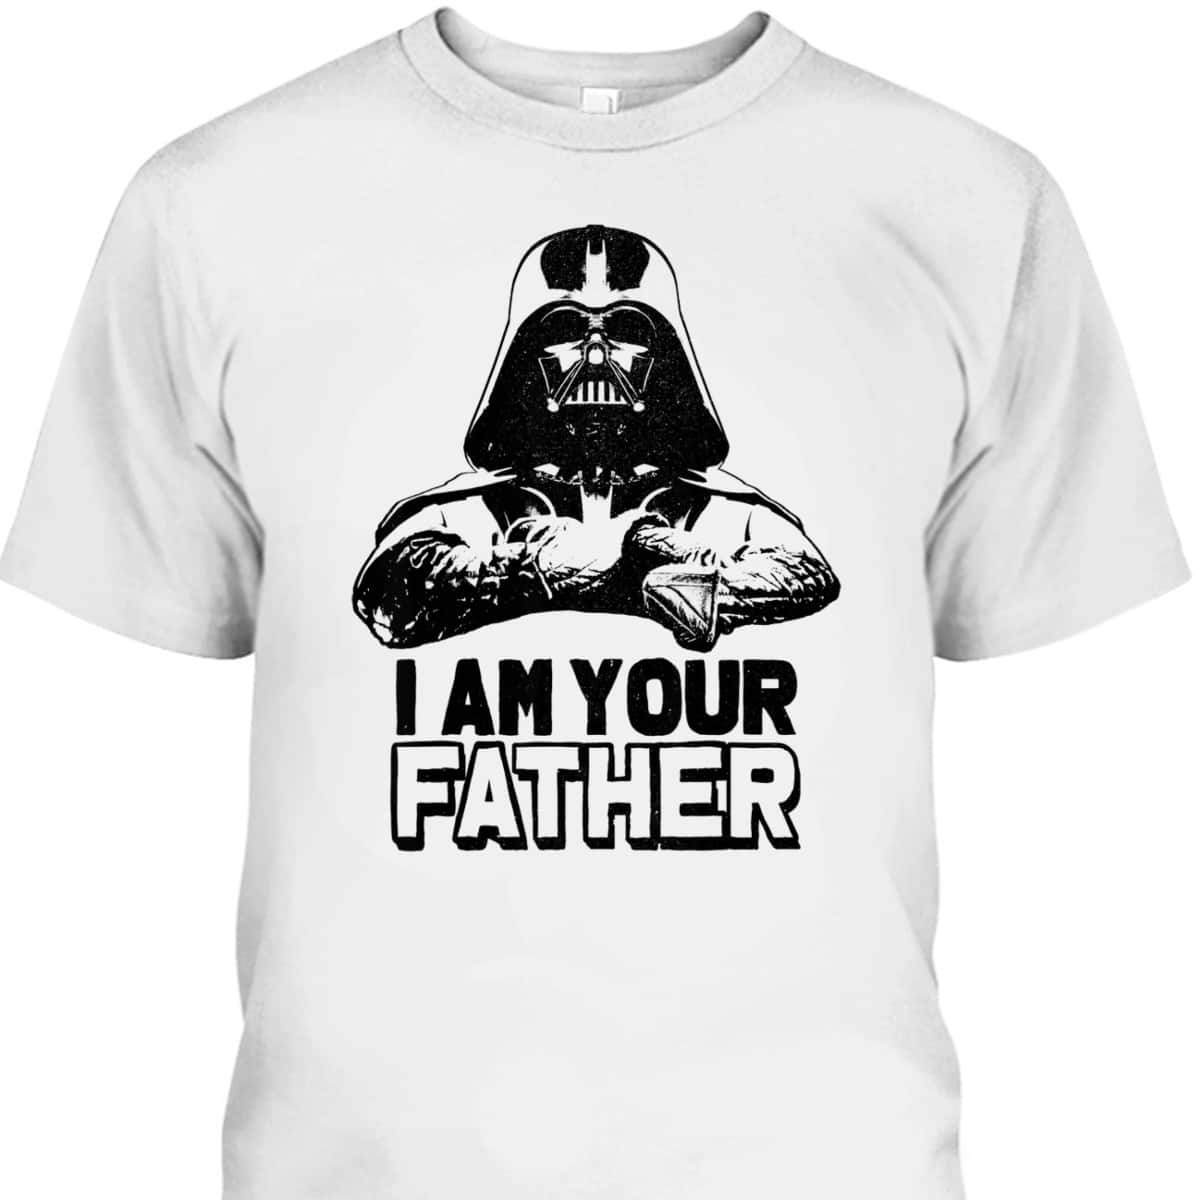 Star Wars Darth Vader I Am Your Father Father's Day T-Shirt Gift For Father-In-Law